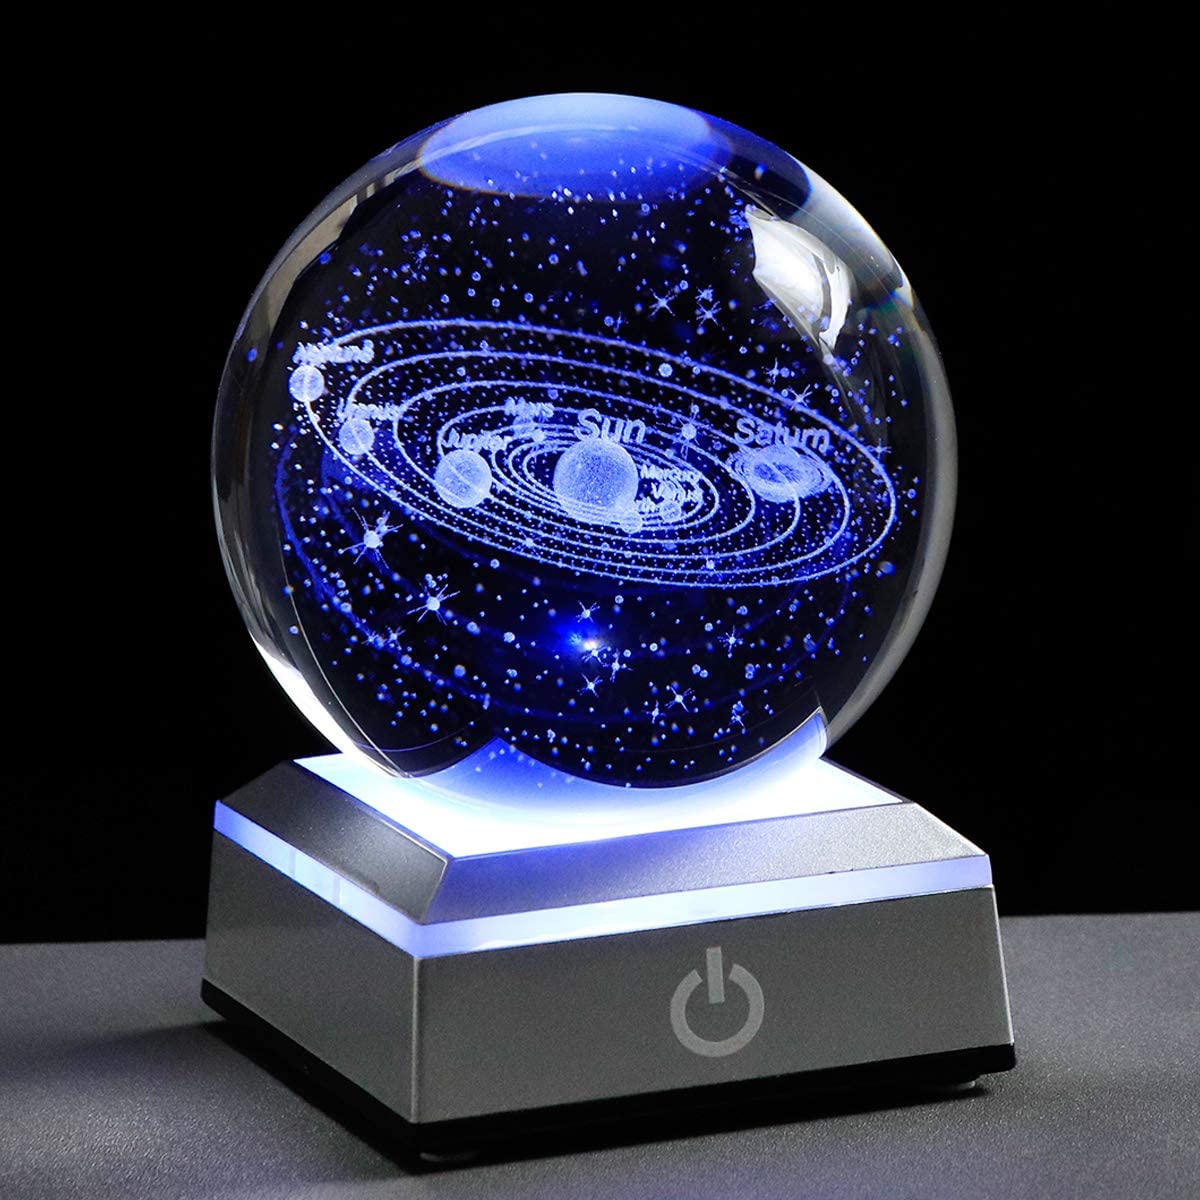 Qianwei 3D Solar System Crystal Ball with LED Colorful Lighting Touch Base, Solar System Model Decor Science Astronomy Gifts God Bless The World Easter Religious Space Gifts Decor